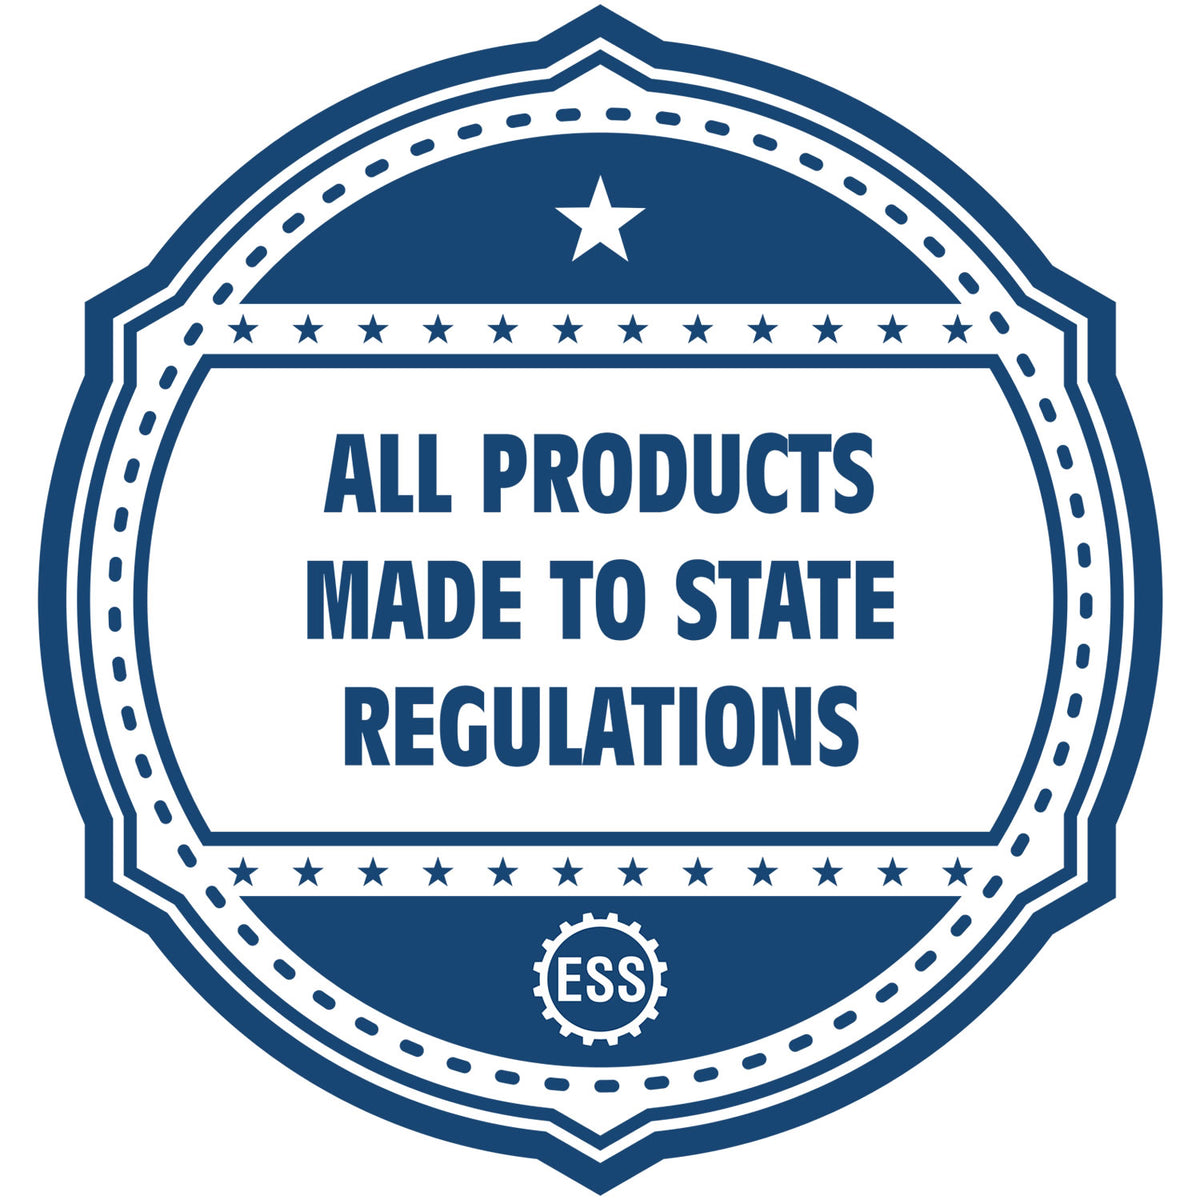 An icon or badge element for the Slim Pre-Inked Georgia Professional Engineer Seal Stamp showing that this product is made in compliance with state regulations.